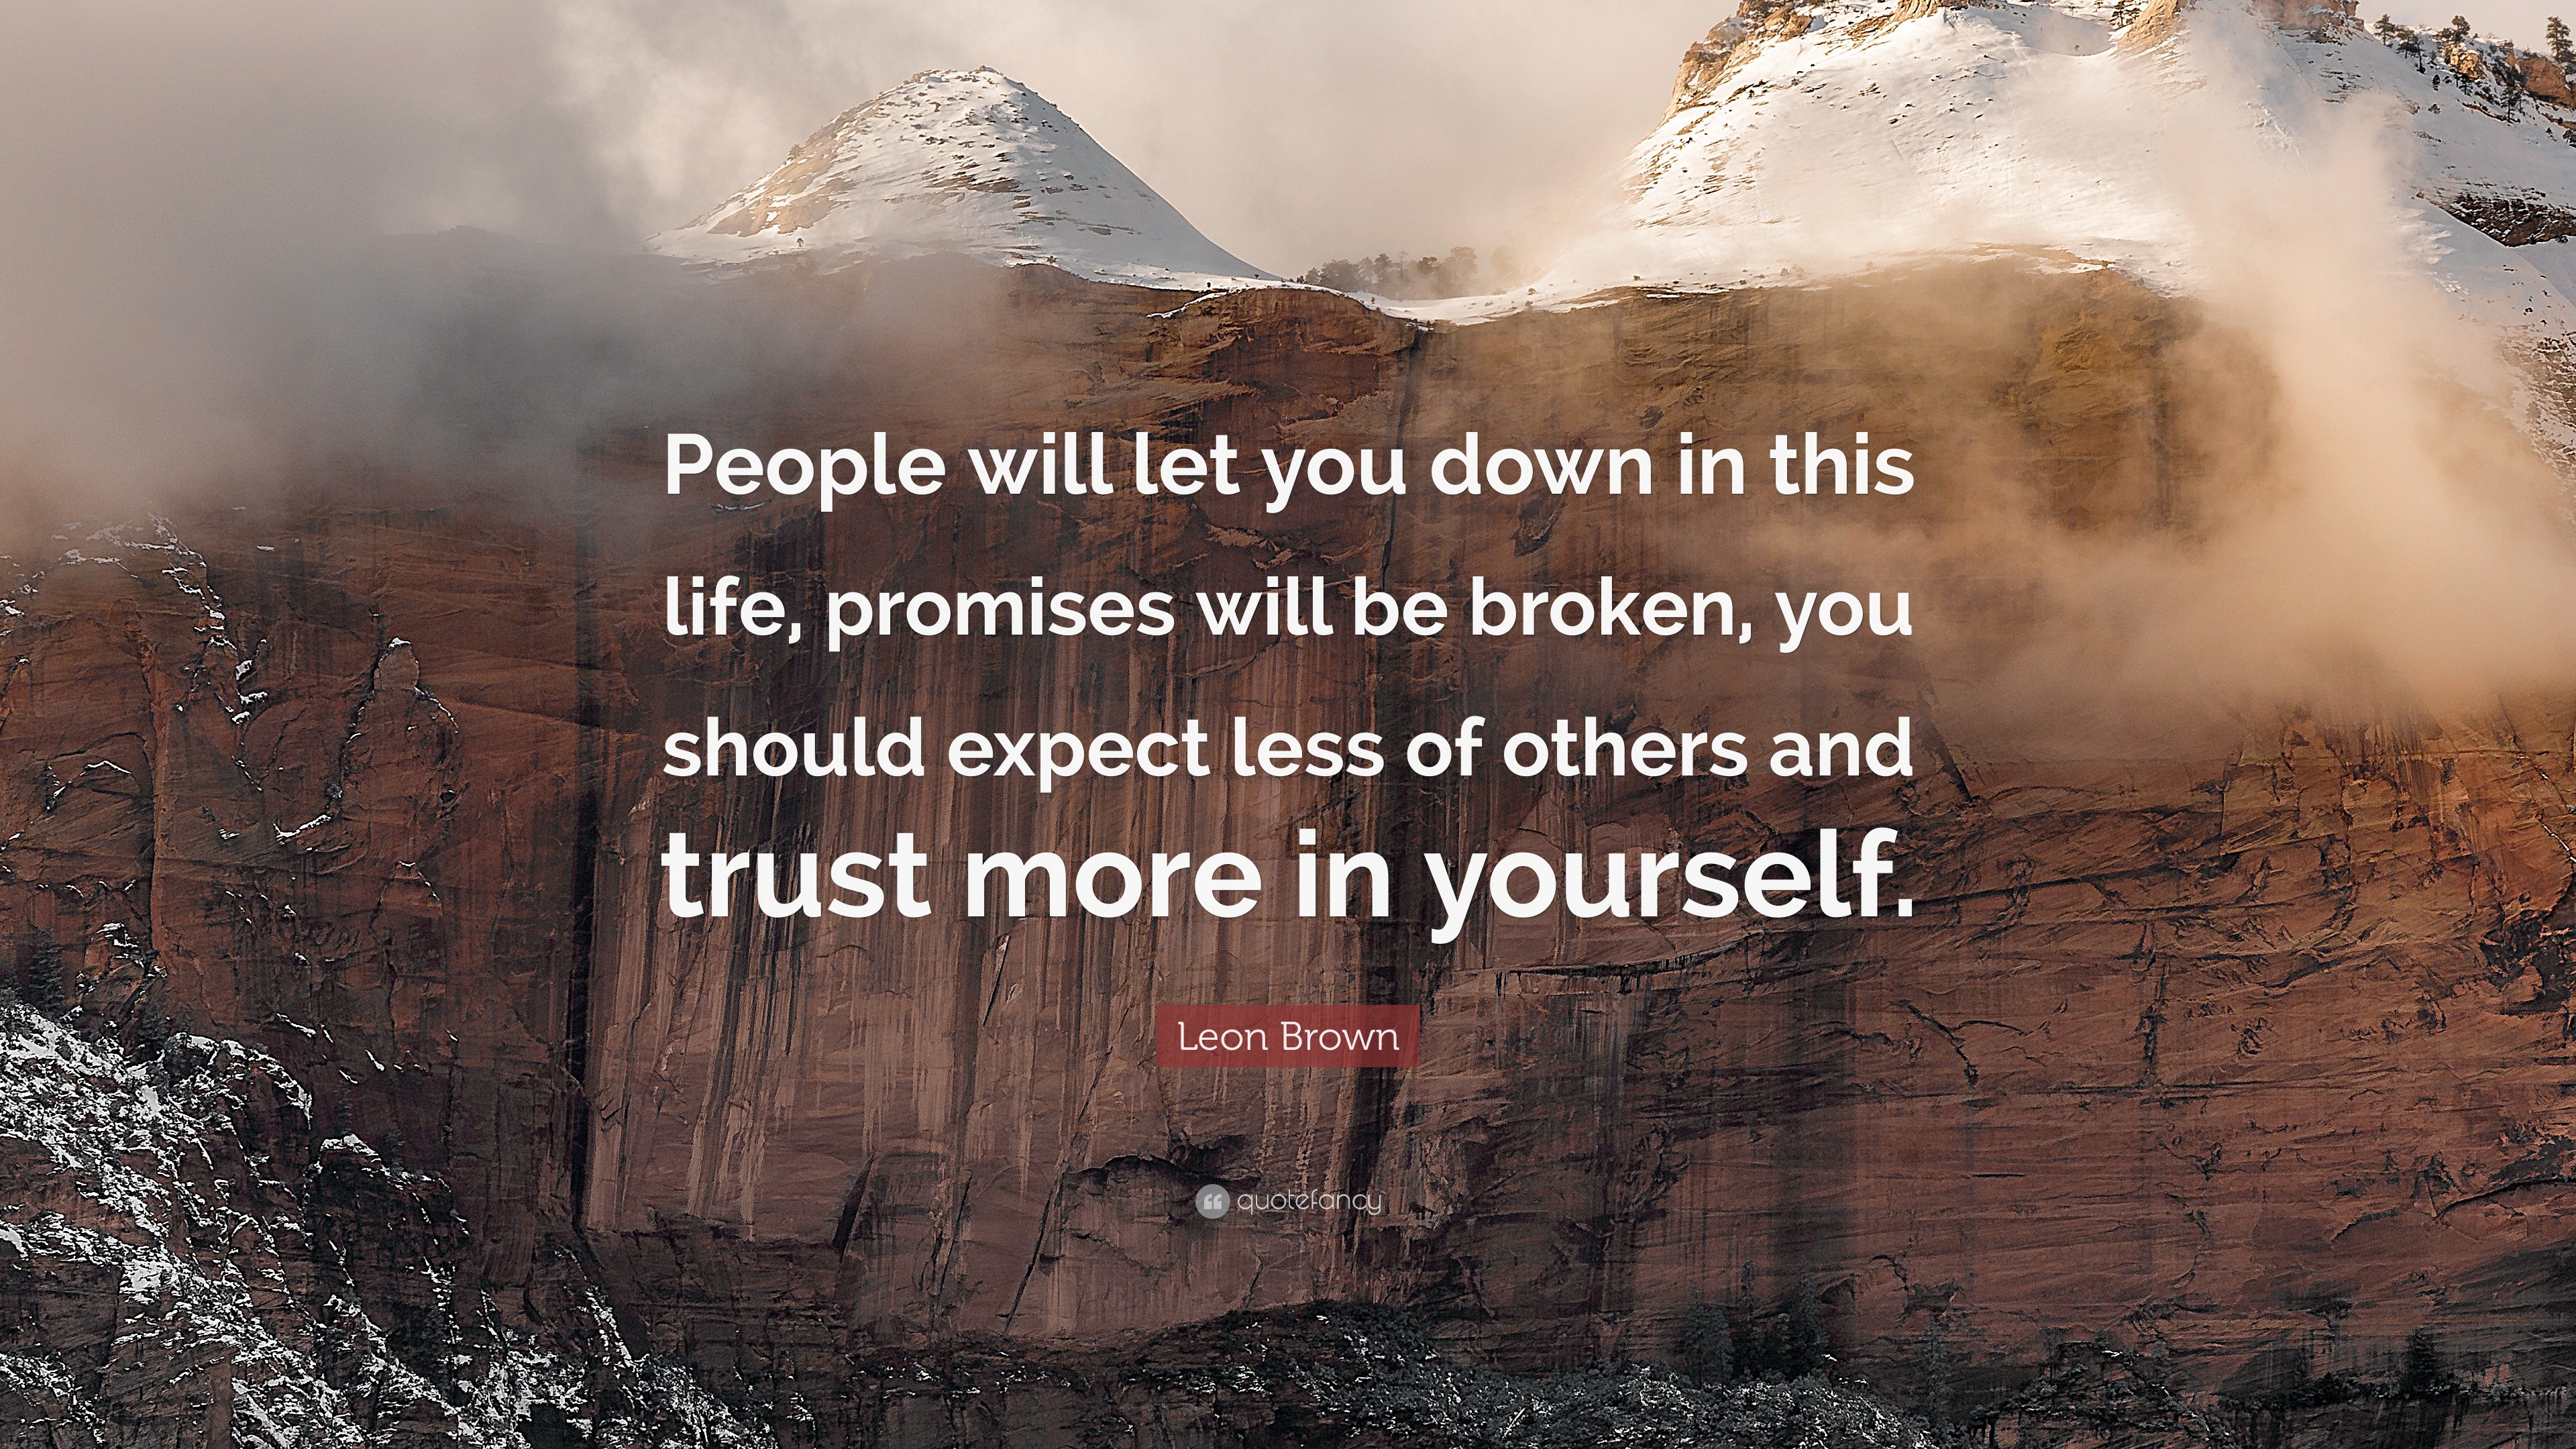 Leon Brown Quote: “People Will Let You Down In This Life, Promises Will Be Broken, You Should Expect Less Of Others And Trust More In Yours...”